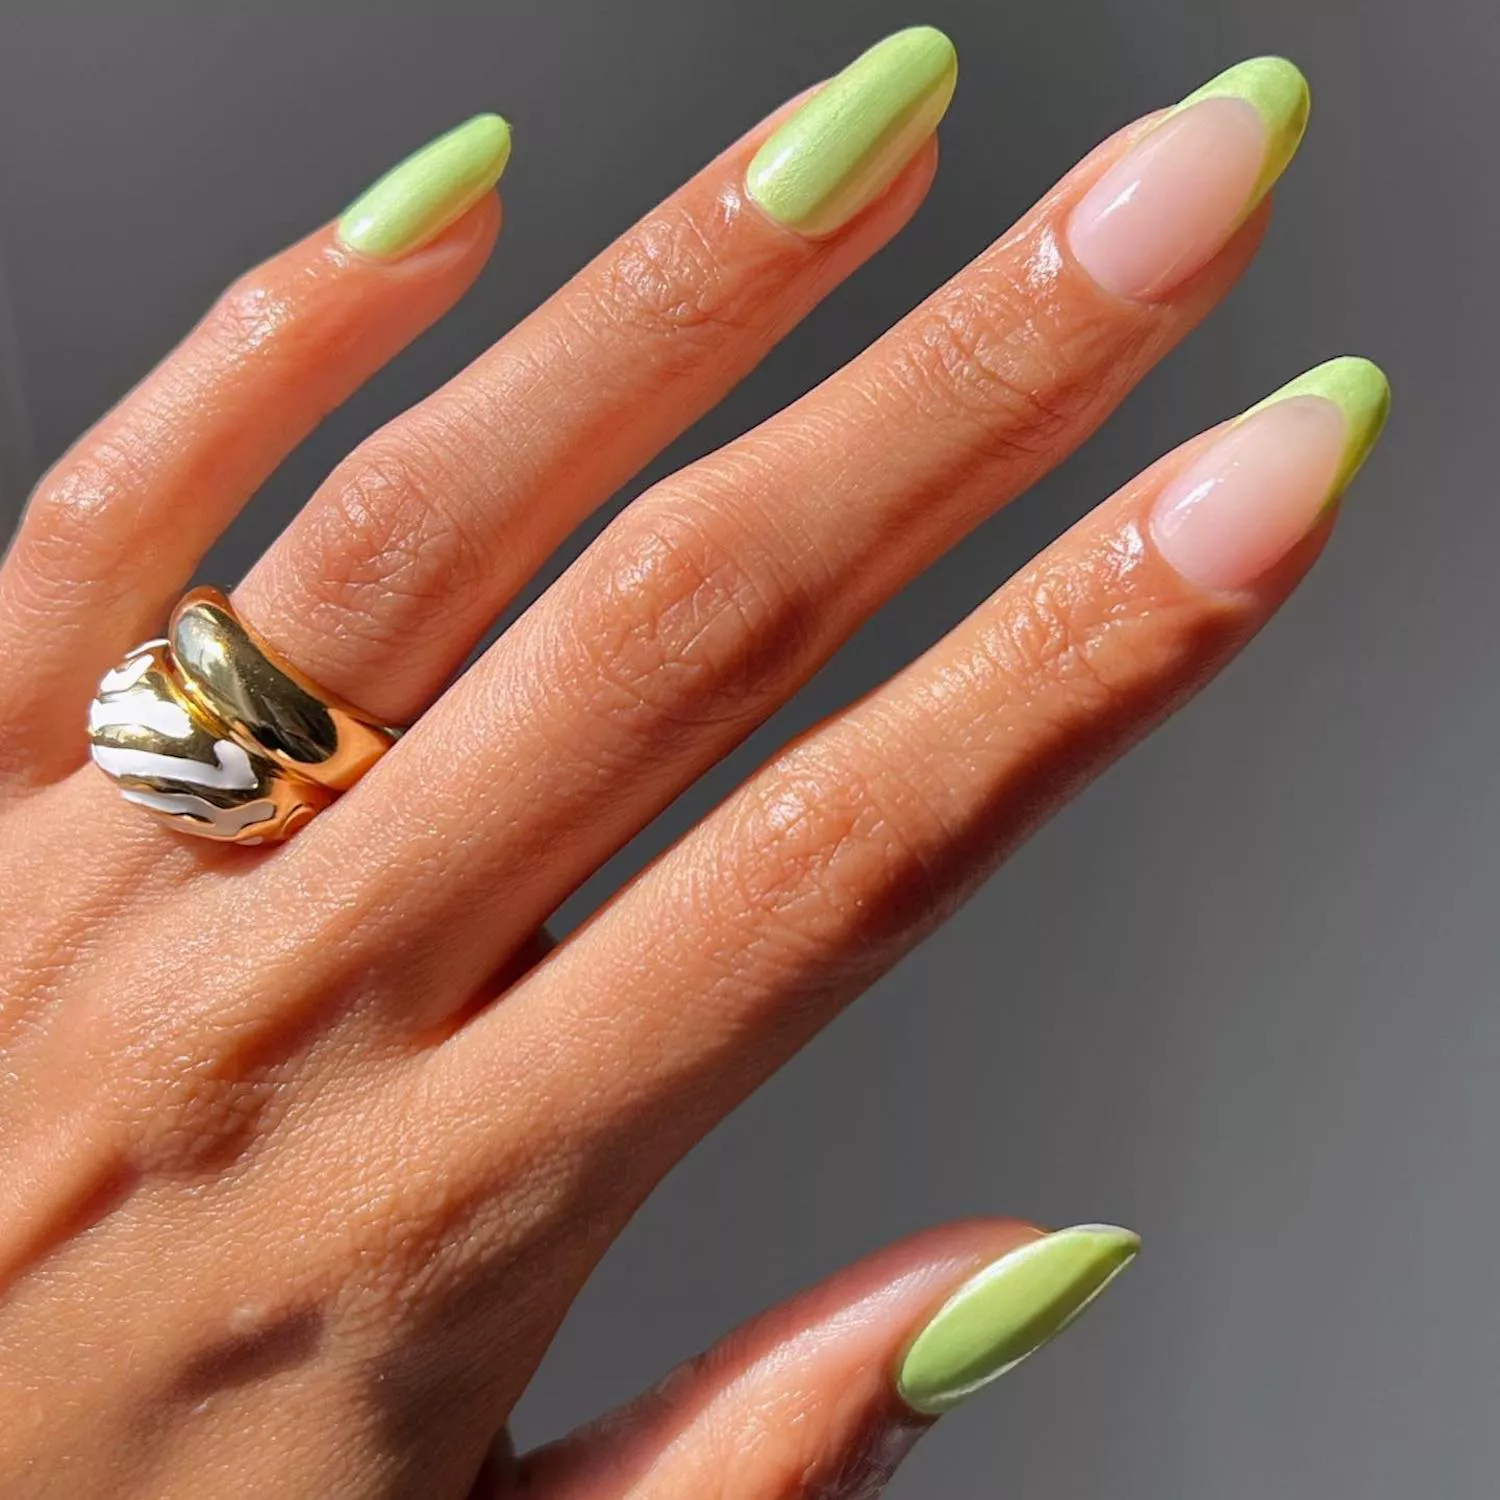 Bright green manicure with two French tip accent nails